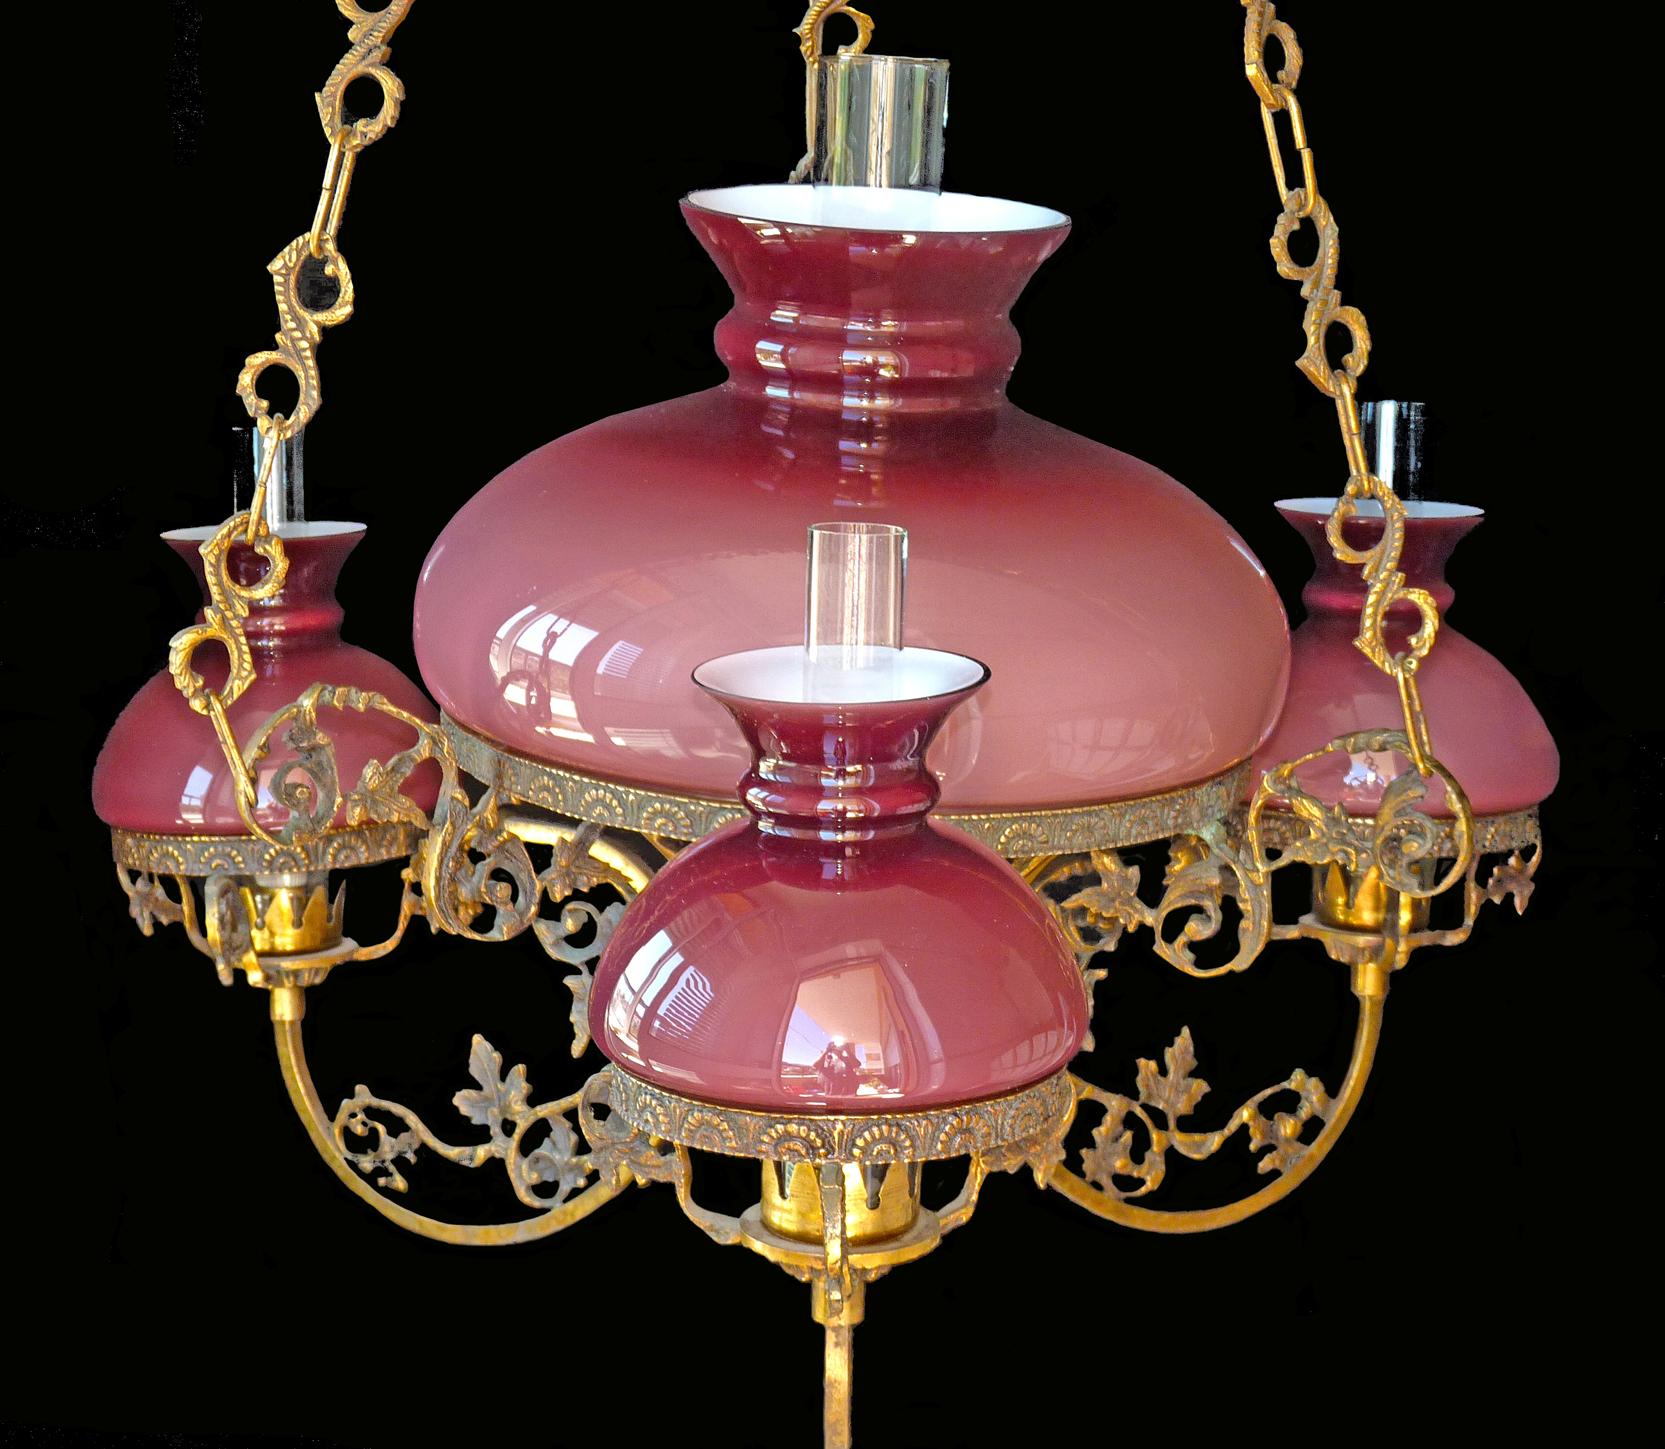 Gorgeous antique circa 1940 French Victorian four-light bulbs chandelier with opaline pink cased glass and chiselled gilt bronze/ brass.
Measures:
Diameter 30 in / 76 cm
Height 37 in / 95 cm
Diameter glass shades: 14 in (36 cm)/ 9 in (23 cm)/